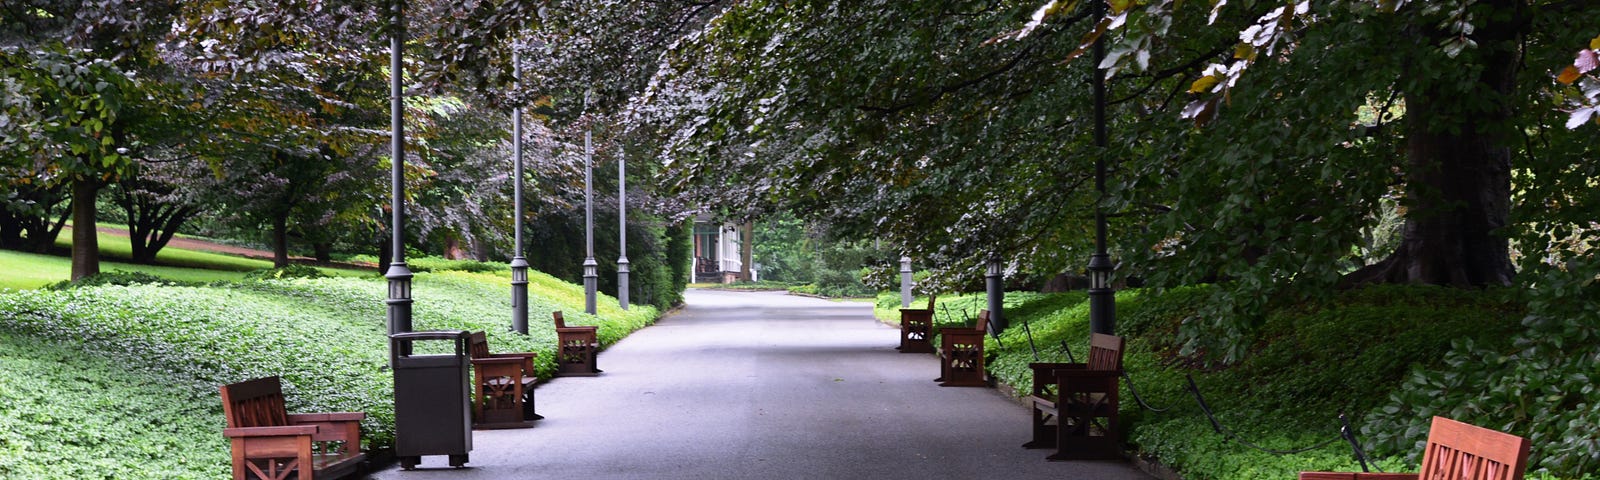 tree lined pathway with wooden benches spaced evenly along the sides, a place for thoughts about an uncertain future